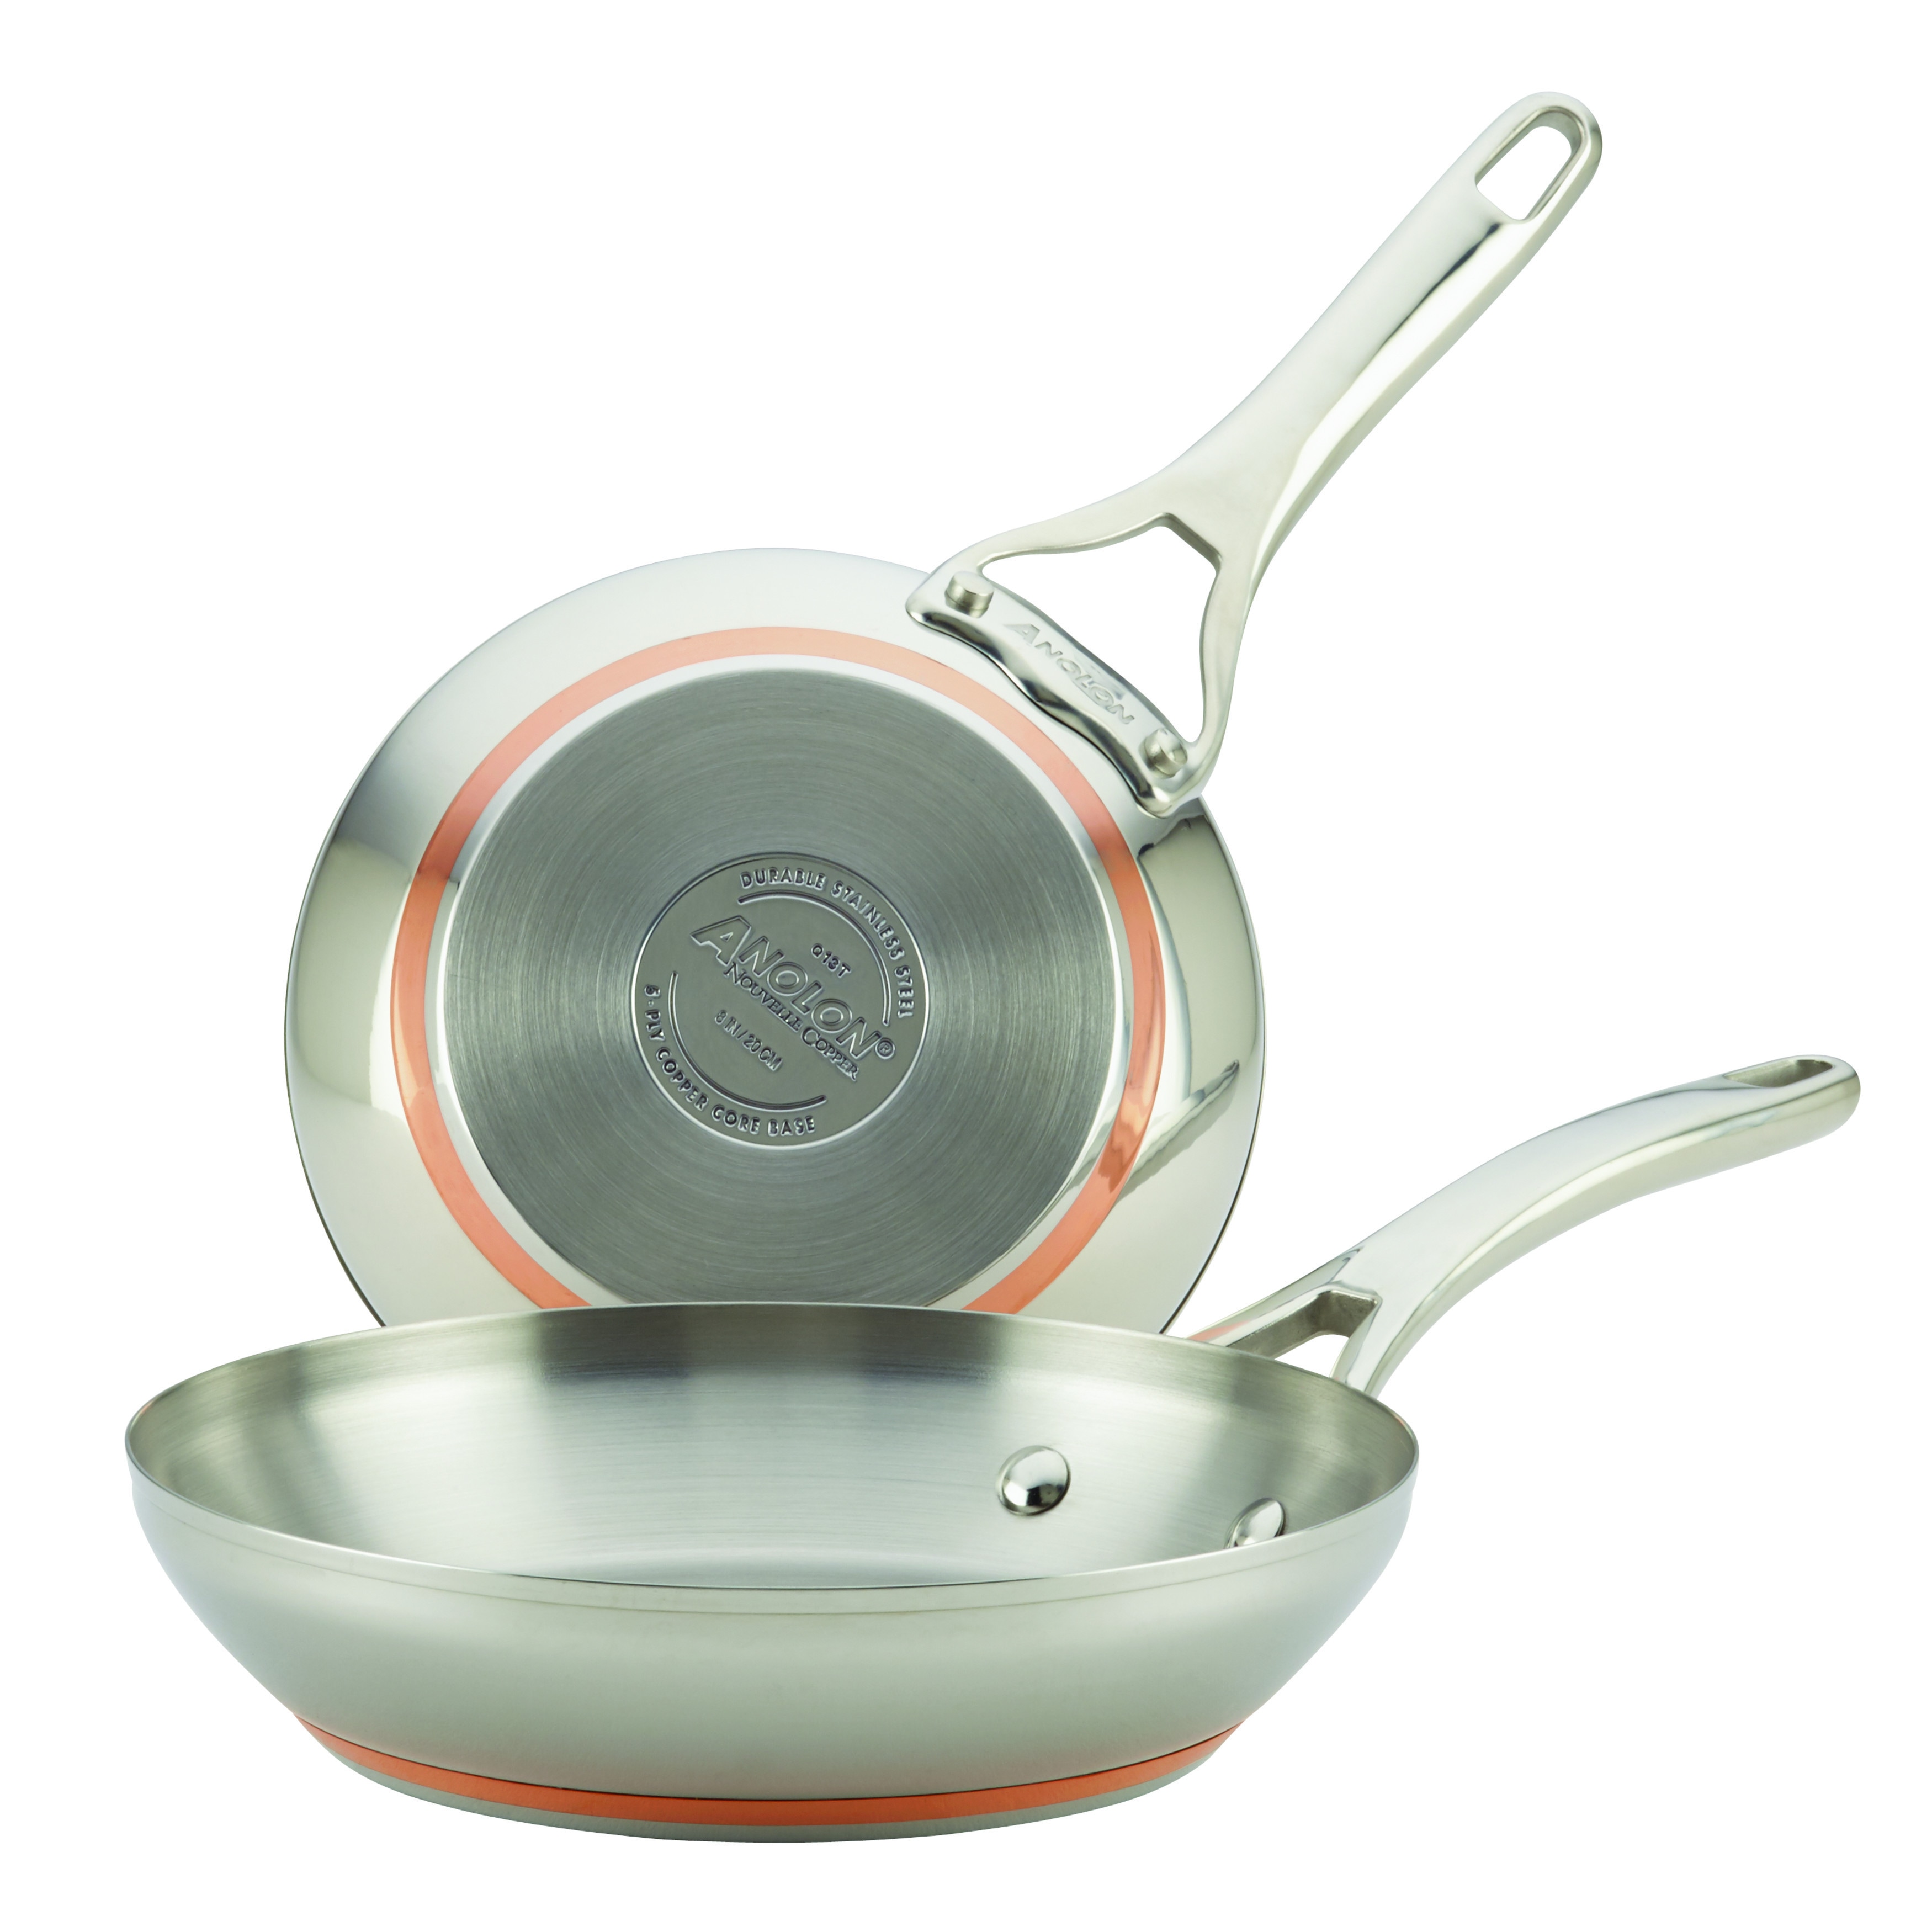 https://ak1.ostkcdn.com/images/products/10641507/Anolon-r-Nouvelle-Copper-Stainless-Steel-Twin-Pack-8-Inch-and-9-1-2-Inch-French-Skillets-029952bd-efc1-4e85-9205-ae602f230e32.jpg